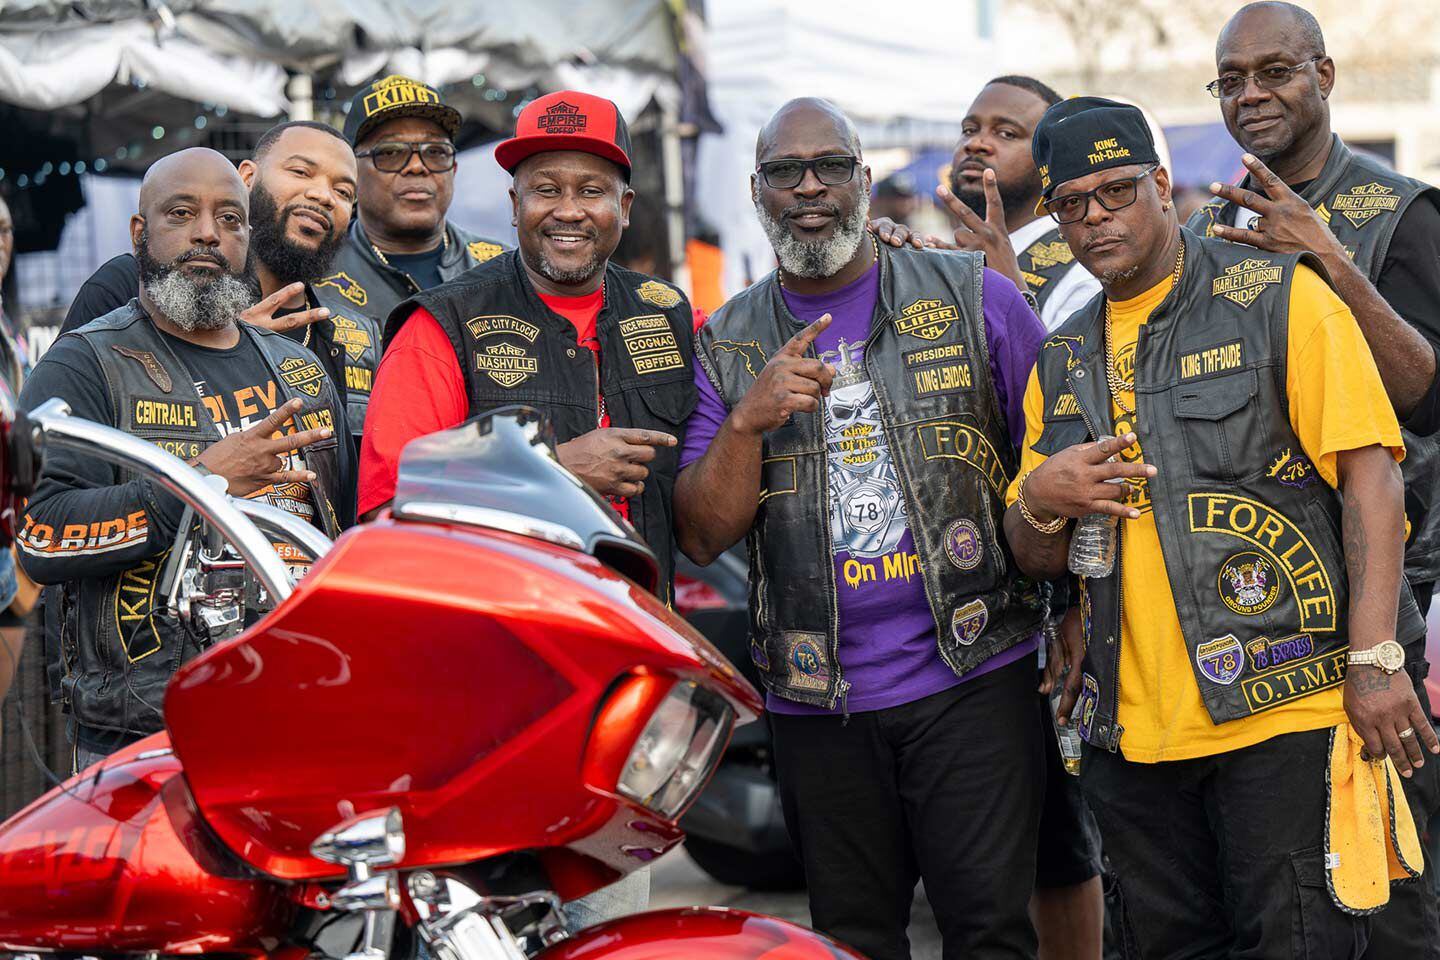 Memories are made of this. Black Bike Week revelers gather in style on Dr. Mary McLeod Bethune Boulevard.